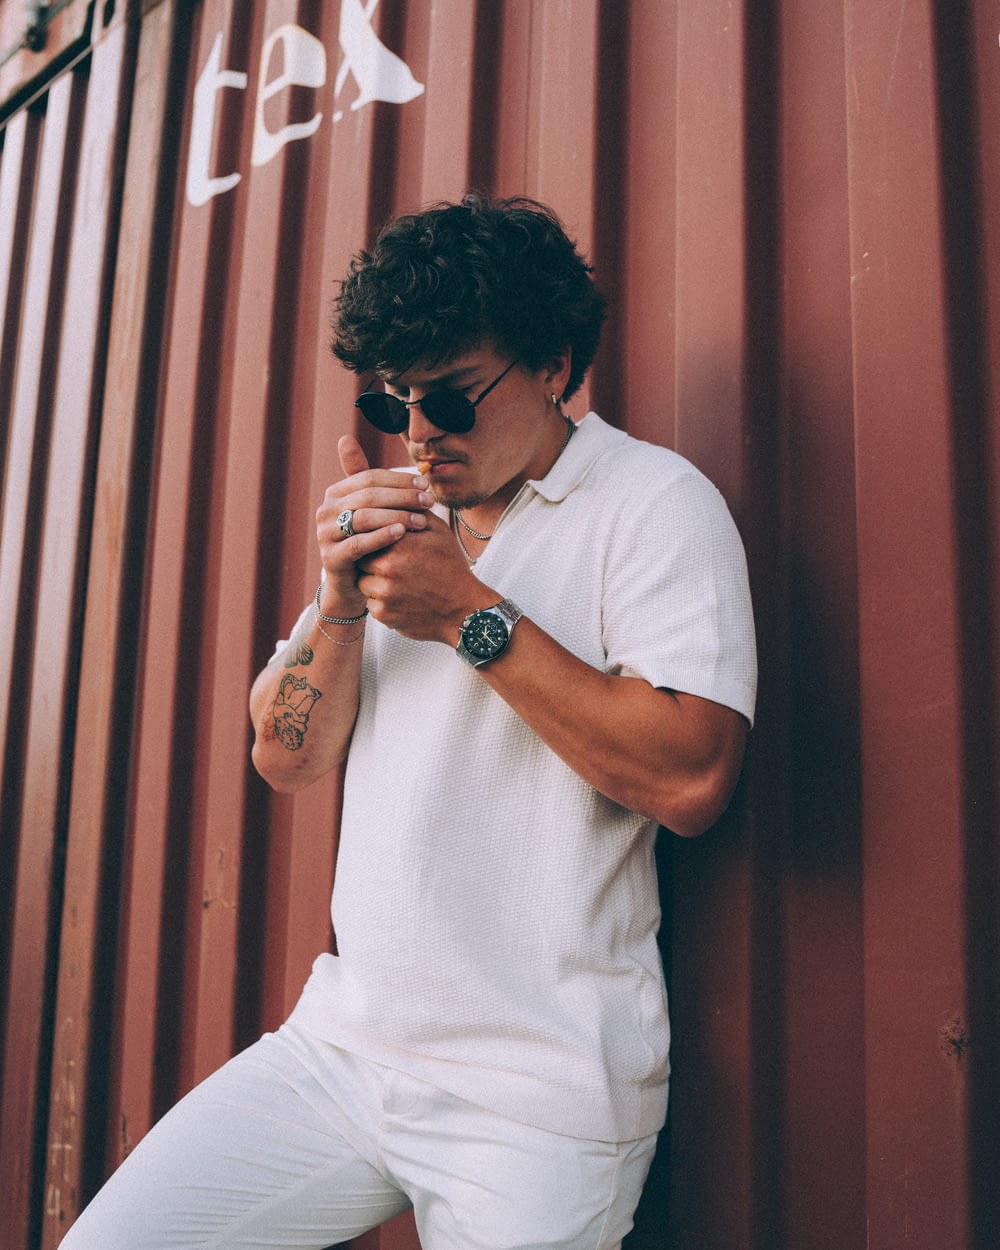 a man leaning against a wall smoking a cigarette